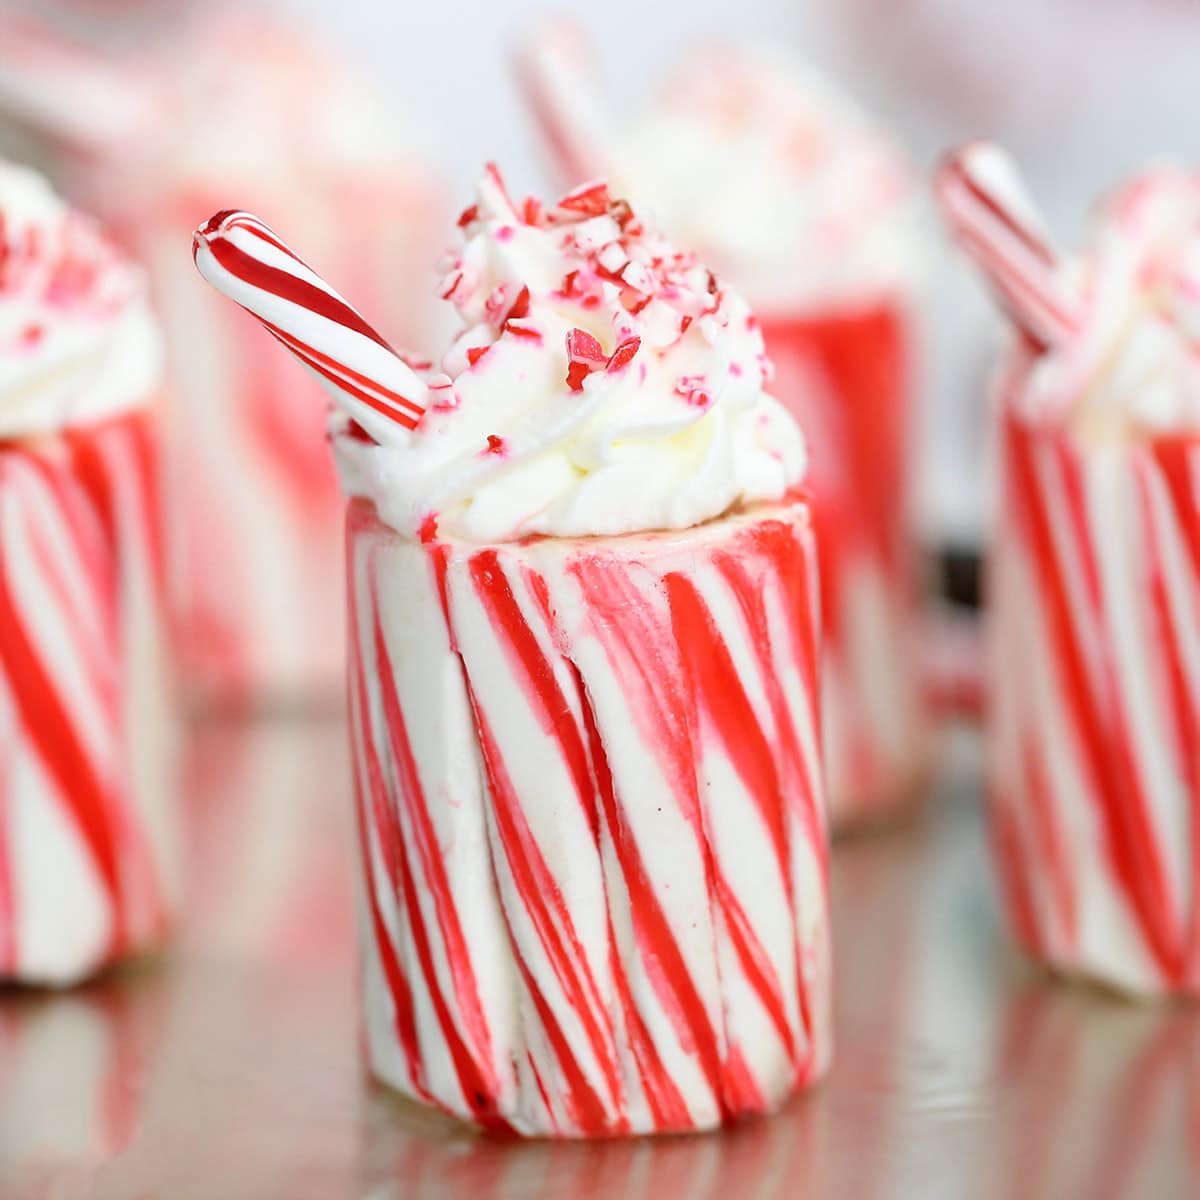 https://www.sugarhero.com/wp-content/uploads/2016/12/candy-cane-cups-square-3-featured-image.jpg